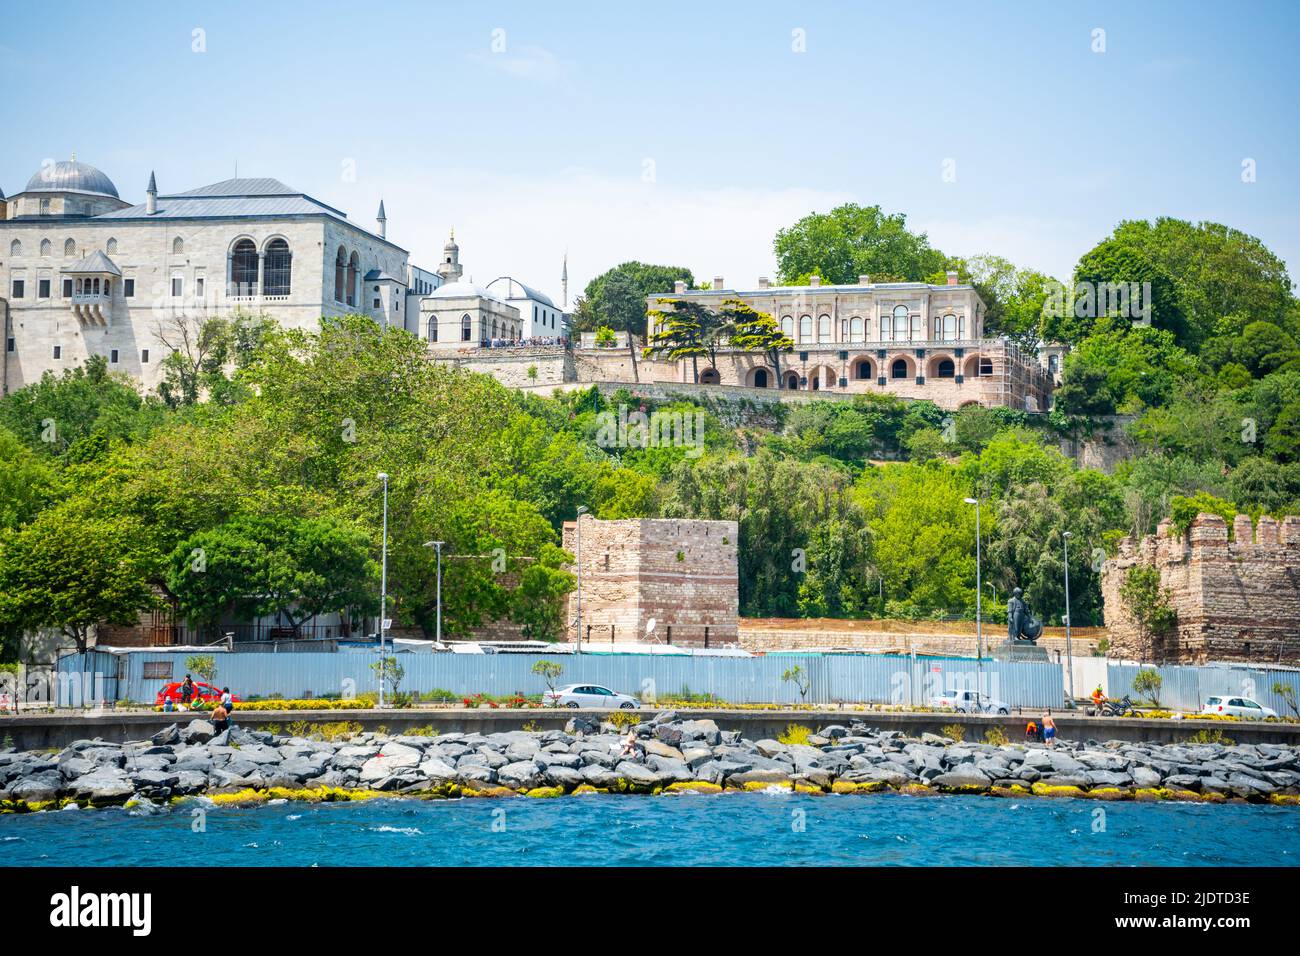 Istanbul, Turkey - May 29, 2022: Scenic view of Hagia Sophia from the Bosporus in Istanbul, Turkey. Awesome Istanbul skyline.  Stock Photo